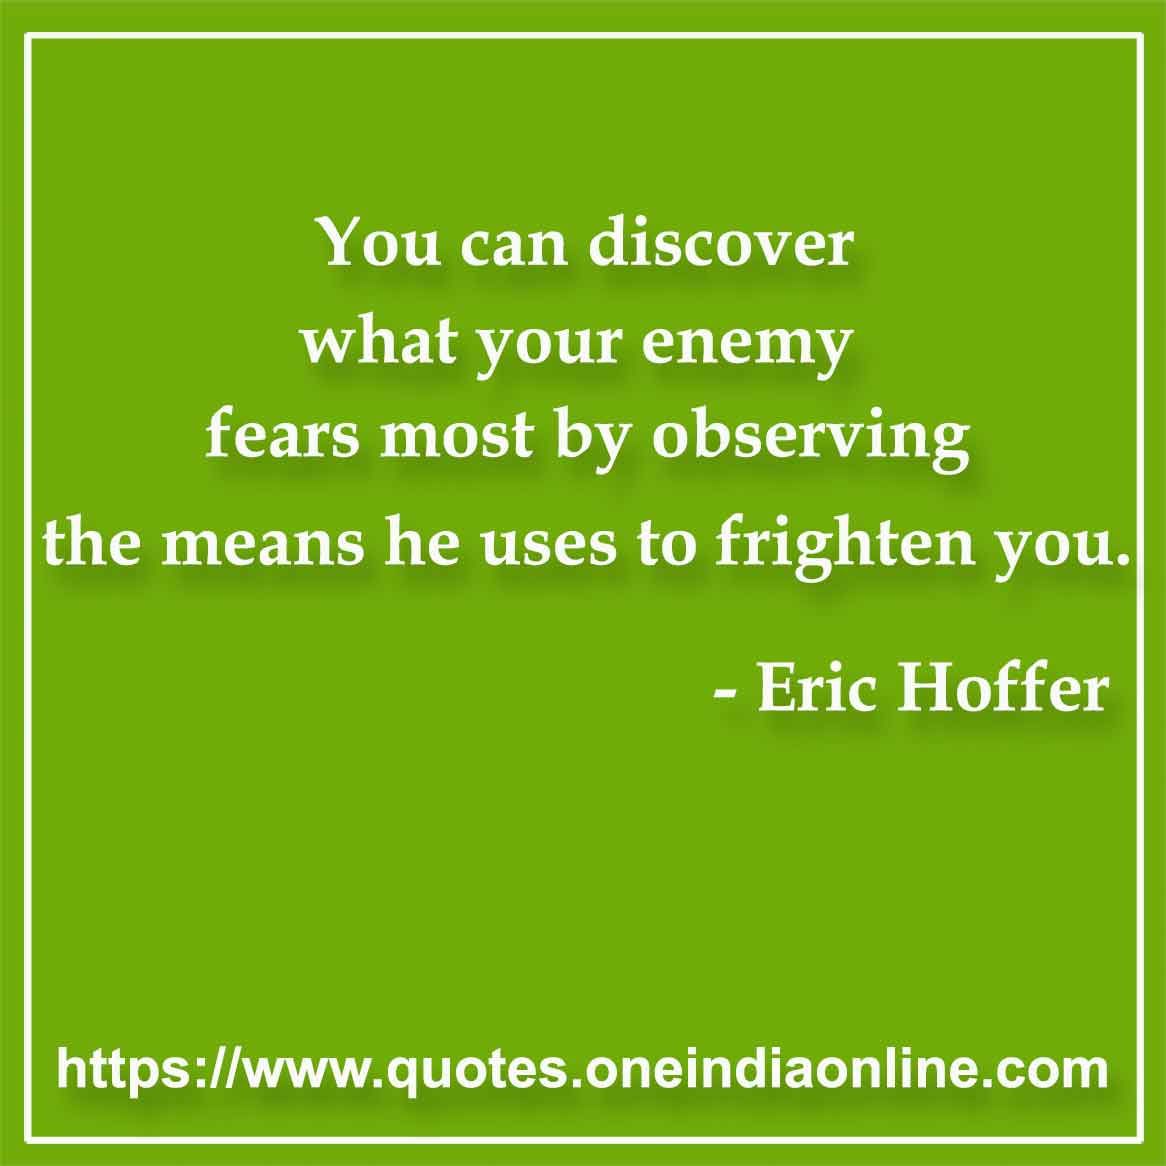 You can discover what your enemy fears most by observing the means he uses to frighten you.

- Fear Quotes by Eric Hoffer 